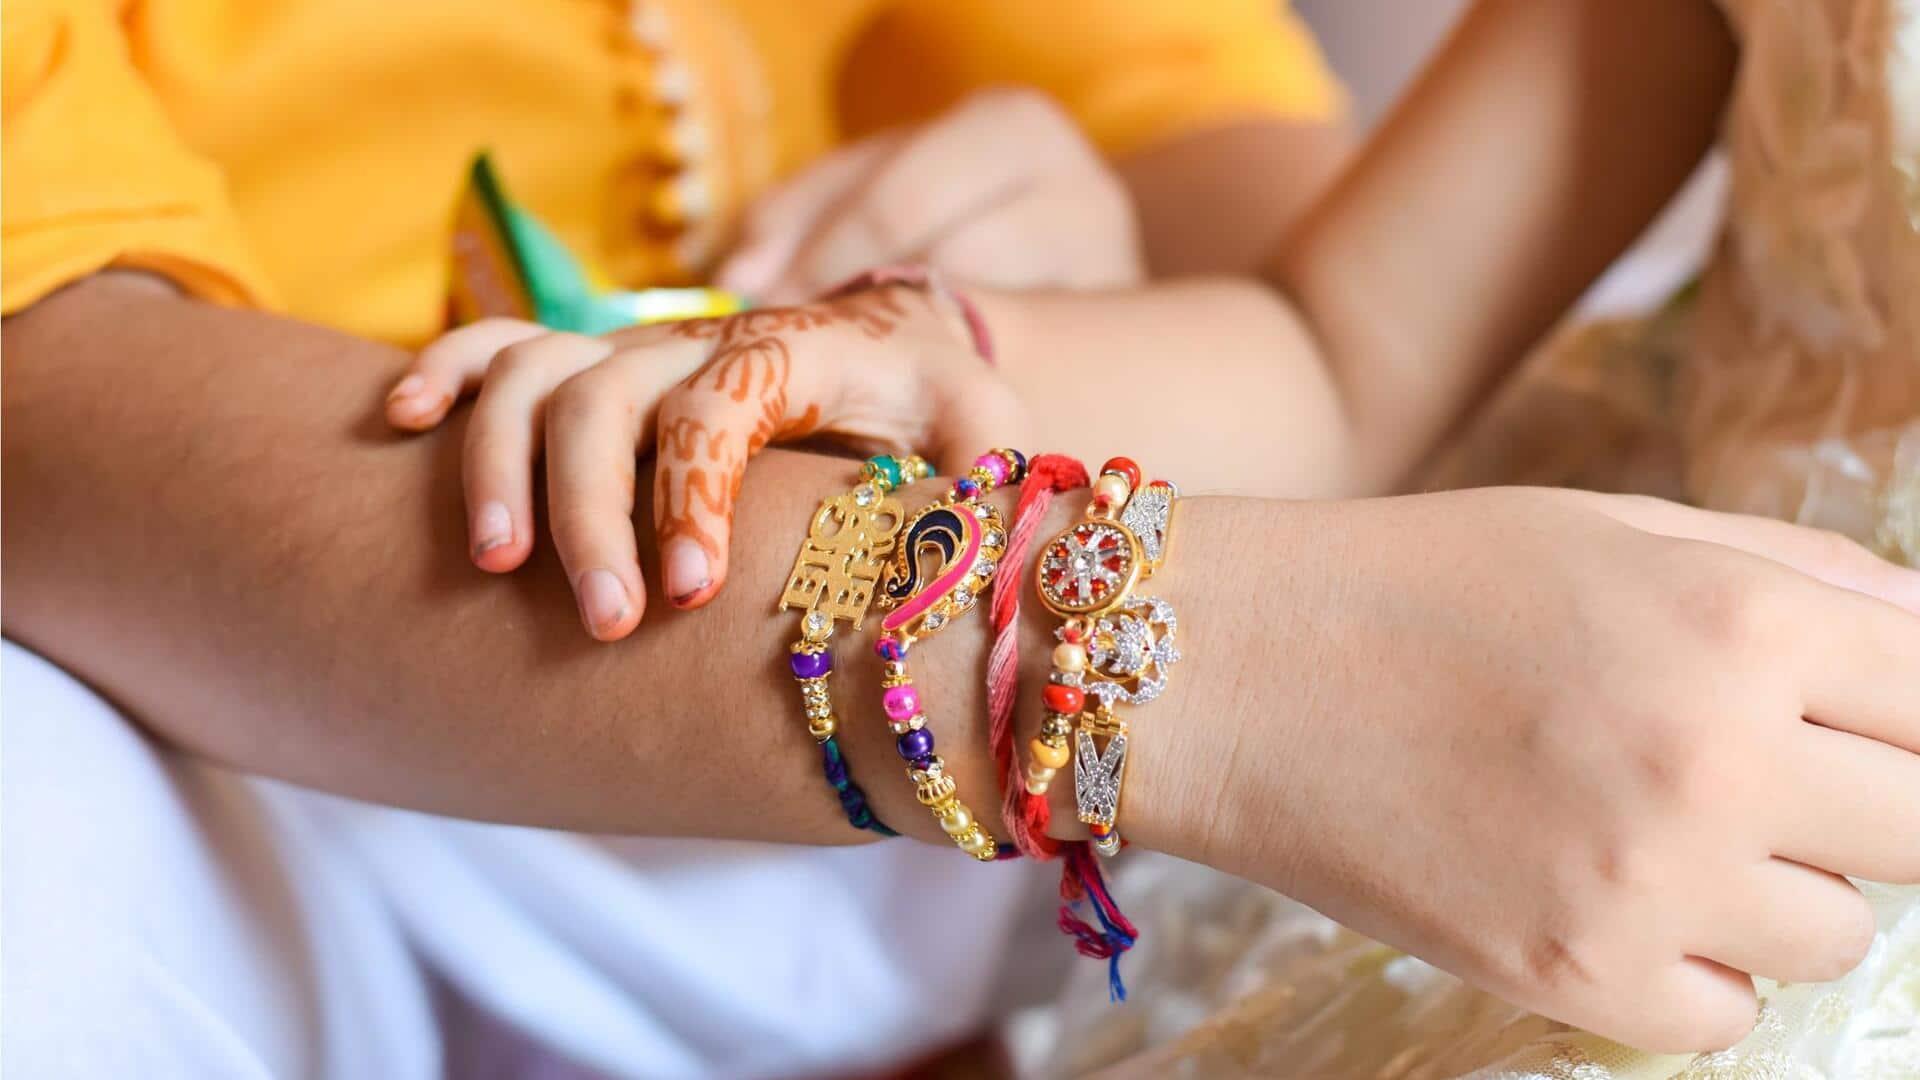 Raksha Bandhan: Celebrate your sister's love with these thoughtful gifts